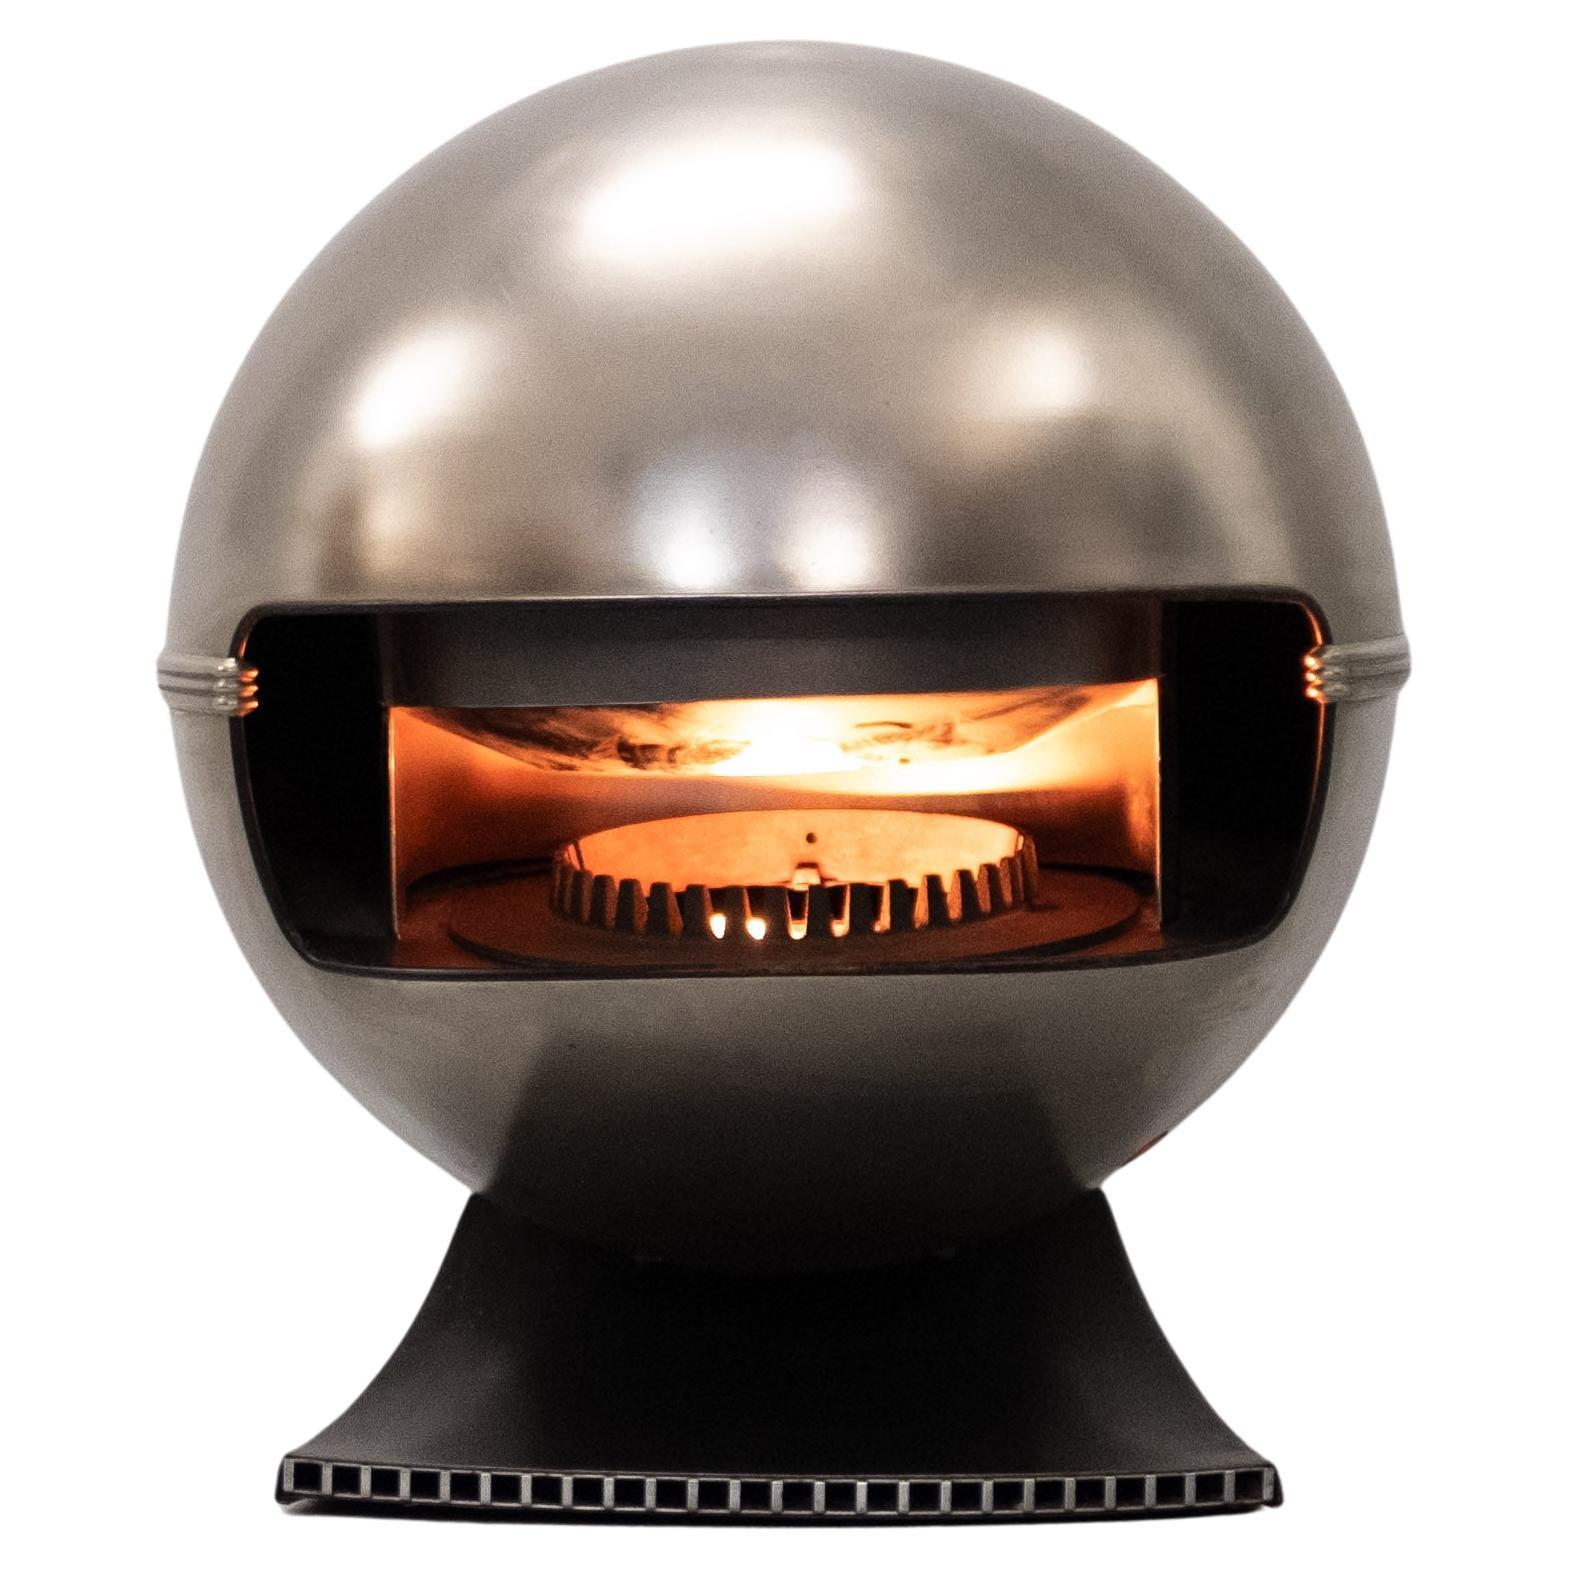 Dutch Richard Wolthekker for Faber - Space Ace  Gas fireplace  1960s  For Sale